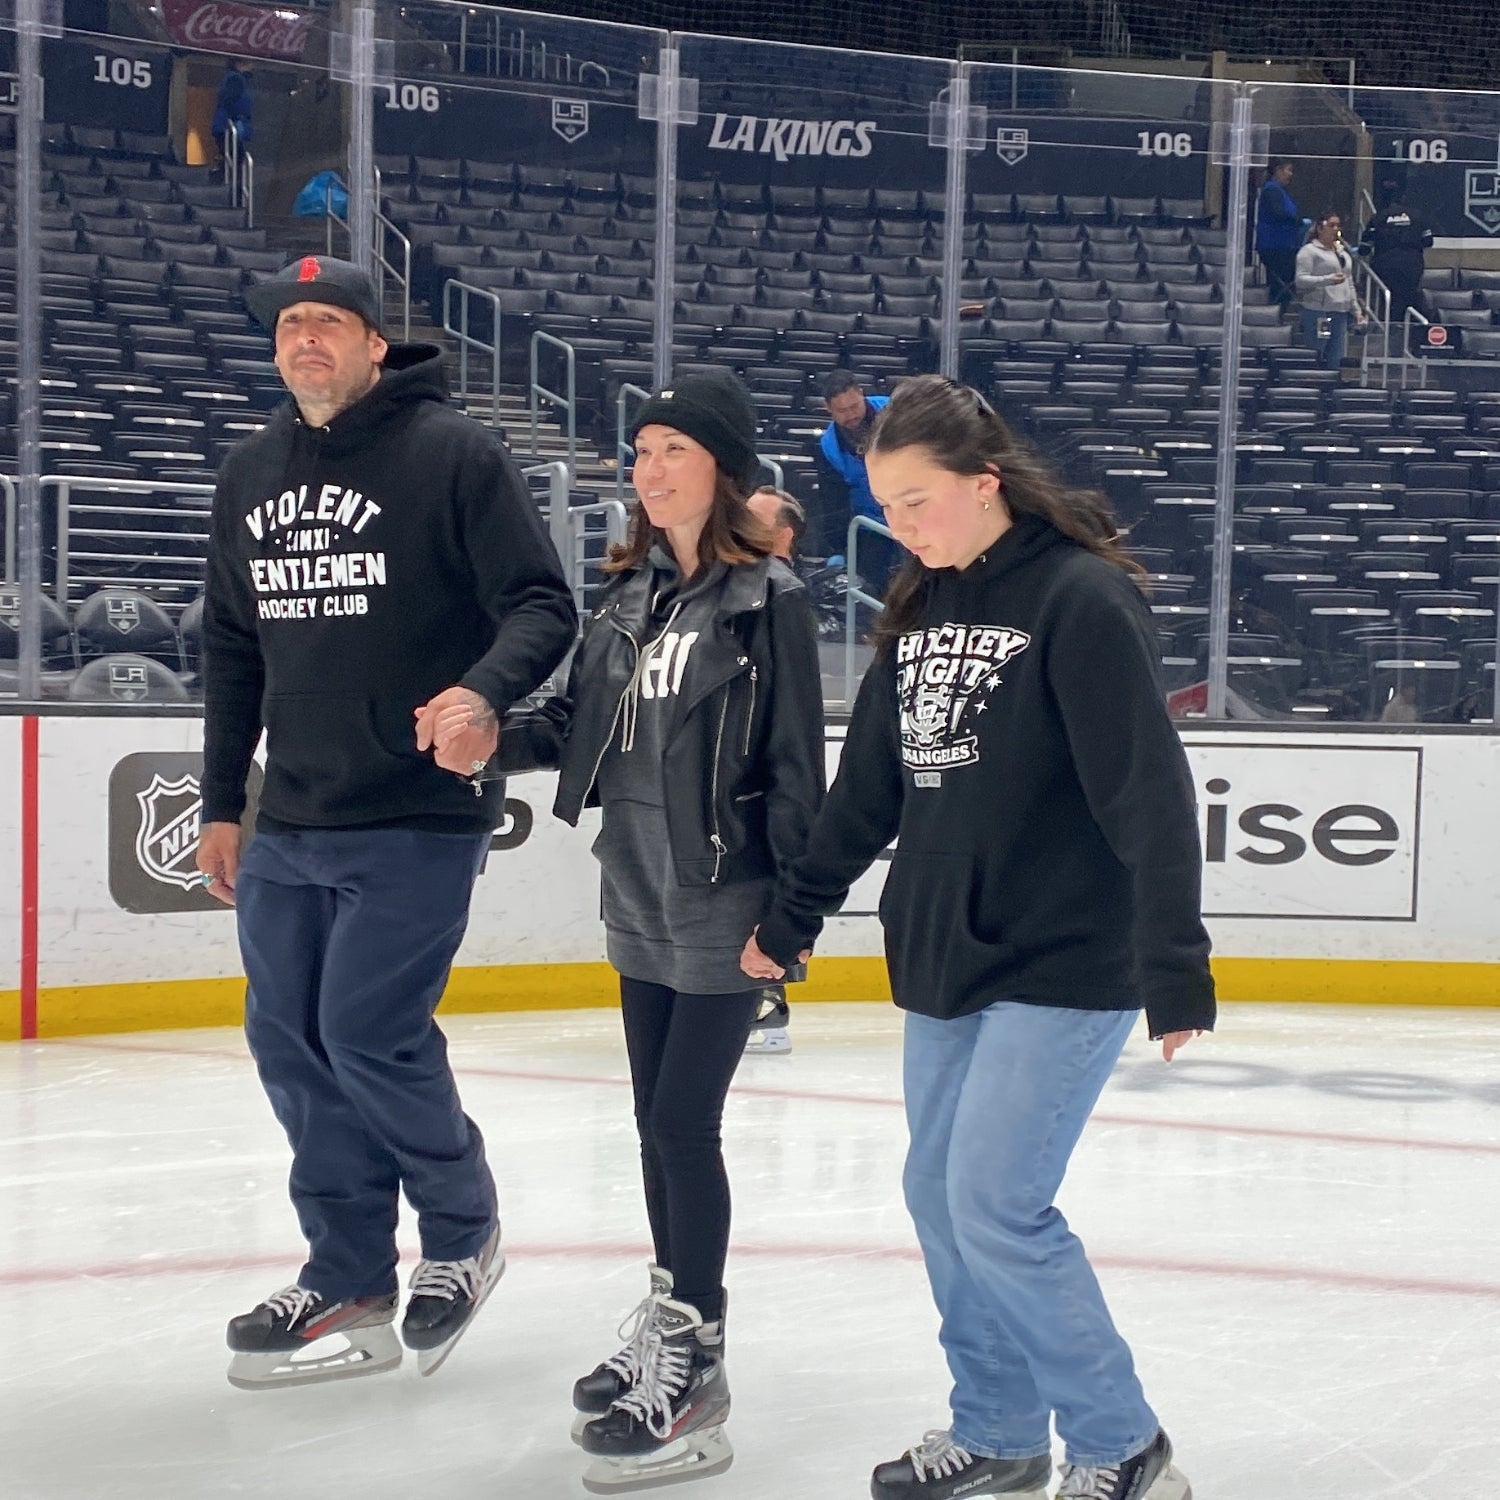 Delseyfly metoparis Hockey Clothing Company gets a group of fans together to go to a NHL Los Angles Kings LAK game and then skate on the ice after